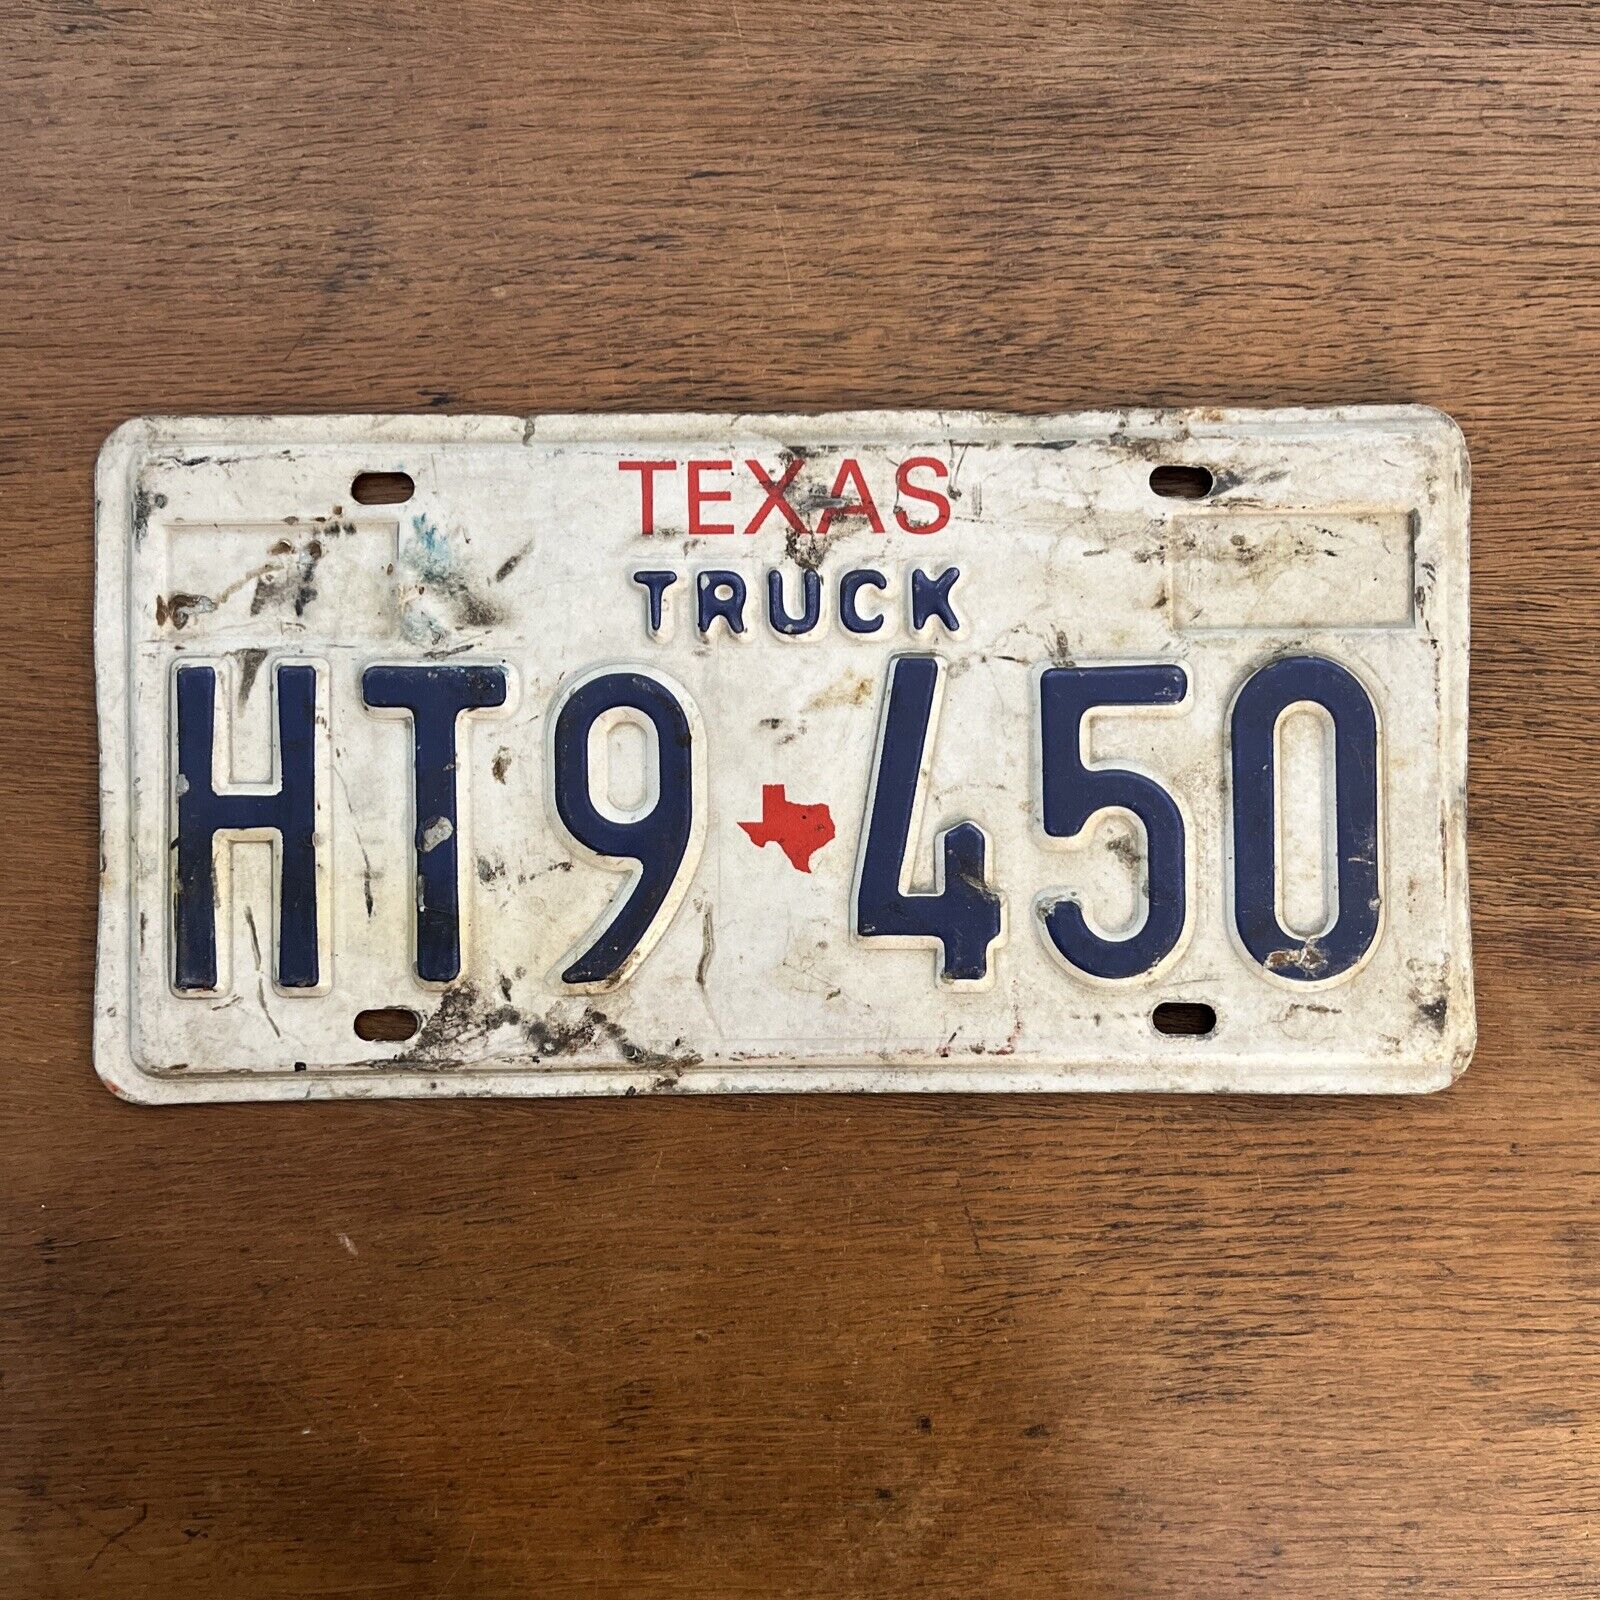 Vintage Texas Truck License Plate Tag